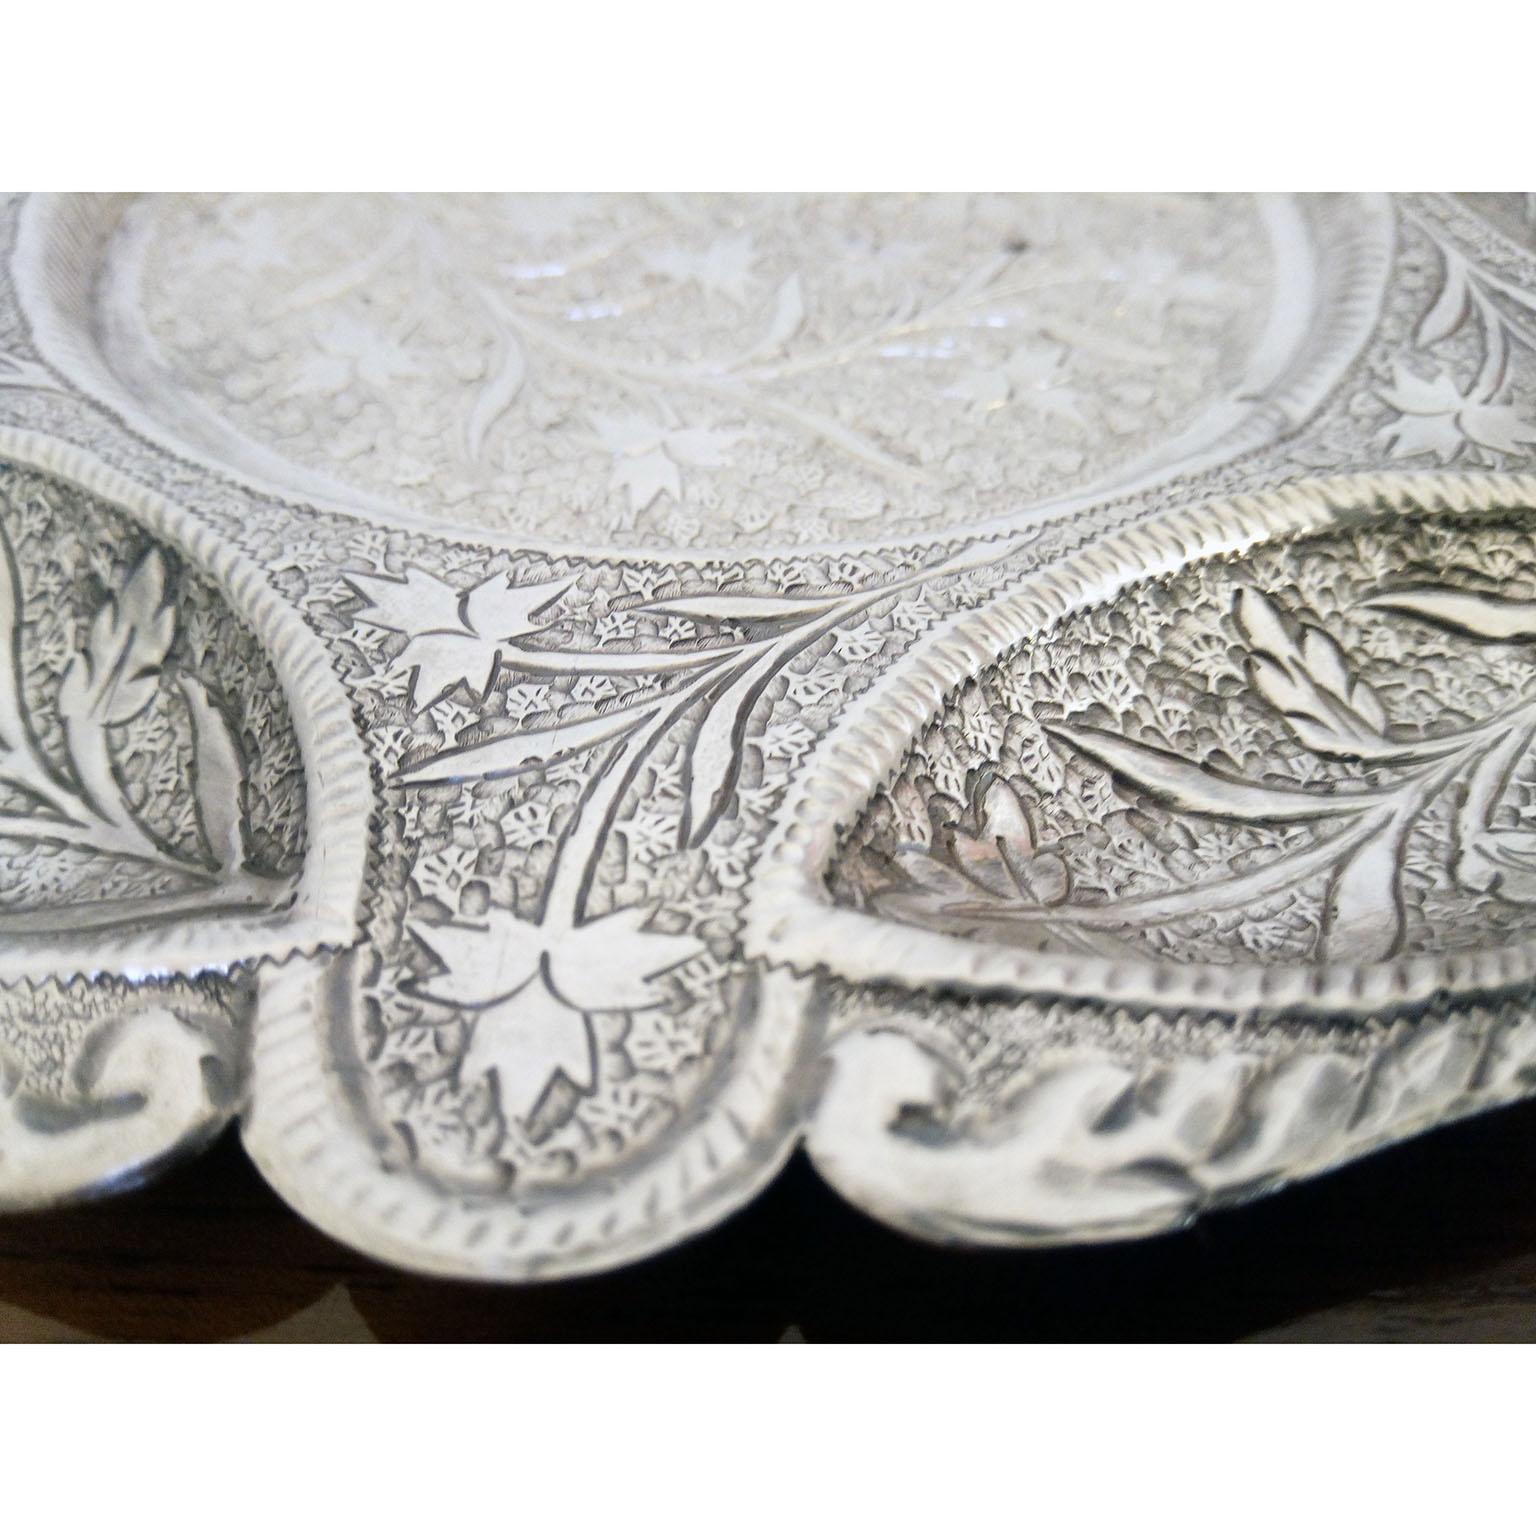 A gorgeous silver round plate with cover, Pakistan 1950s. Very good used condition.
Realized in repousse silver, with intricate floral design. Great for treats and sweets or simply used as decorative item. The lower edge of the cover is engraved